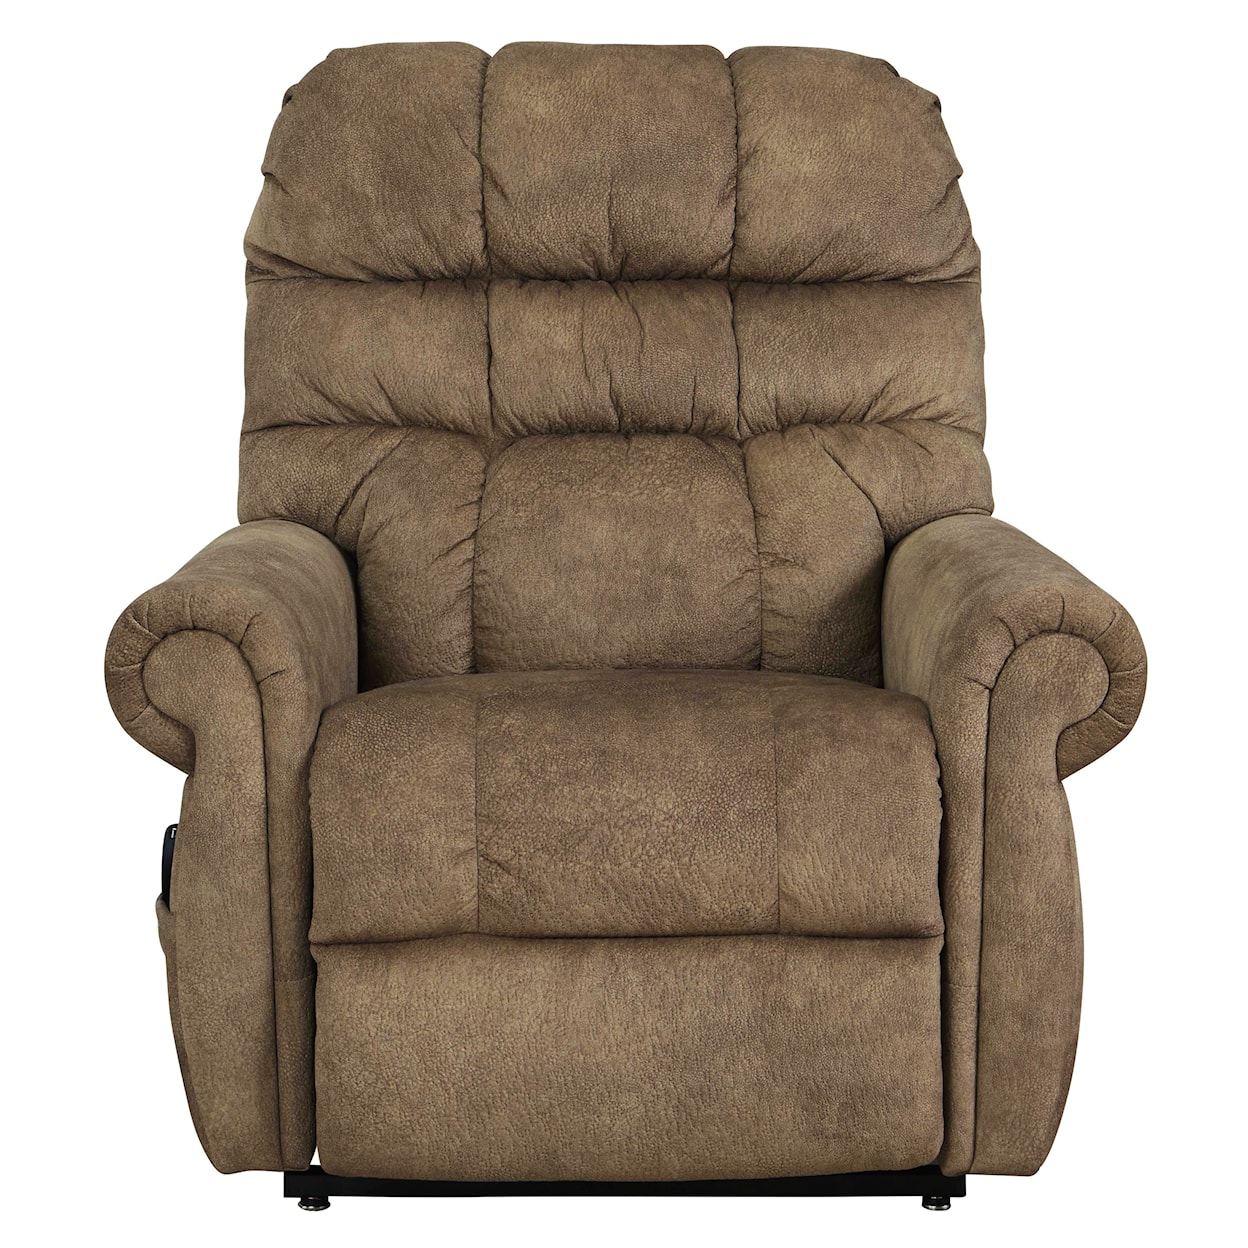 Signature Design by Ashley Mopton Power Lift Recliner